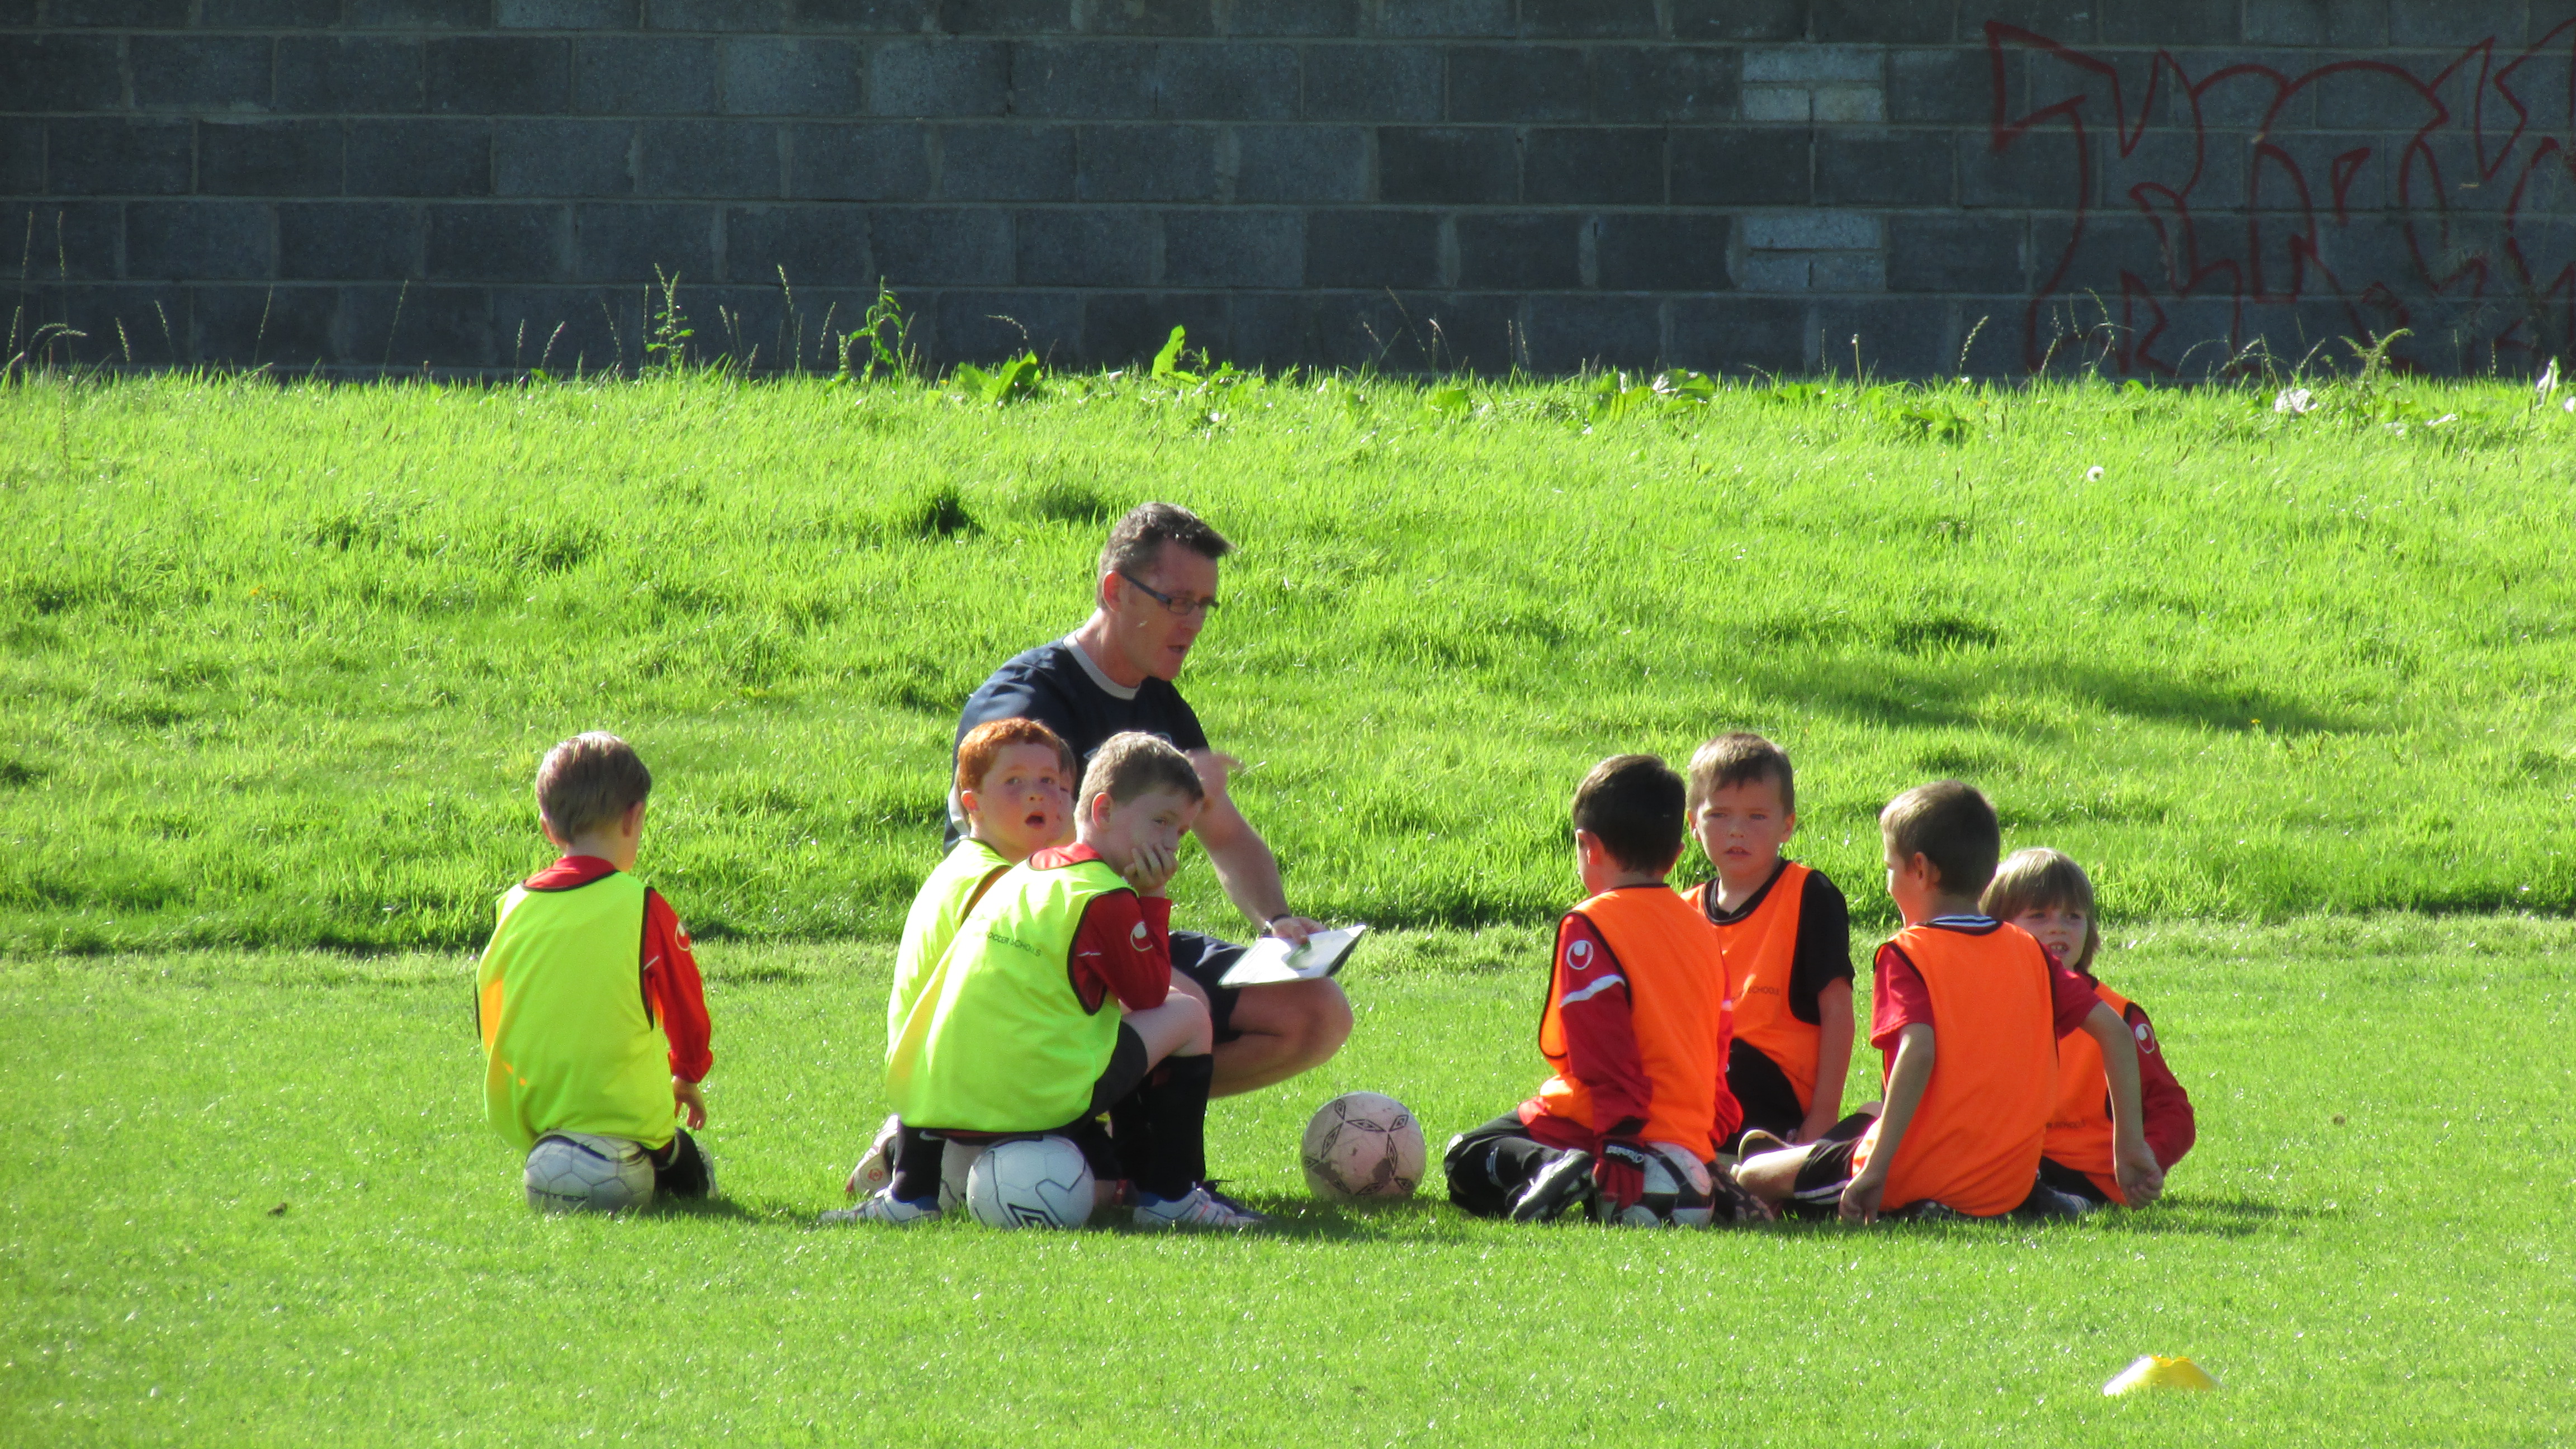 Park Coaching programme with Darren Ahern 05-10-2013